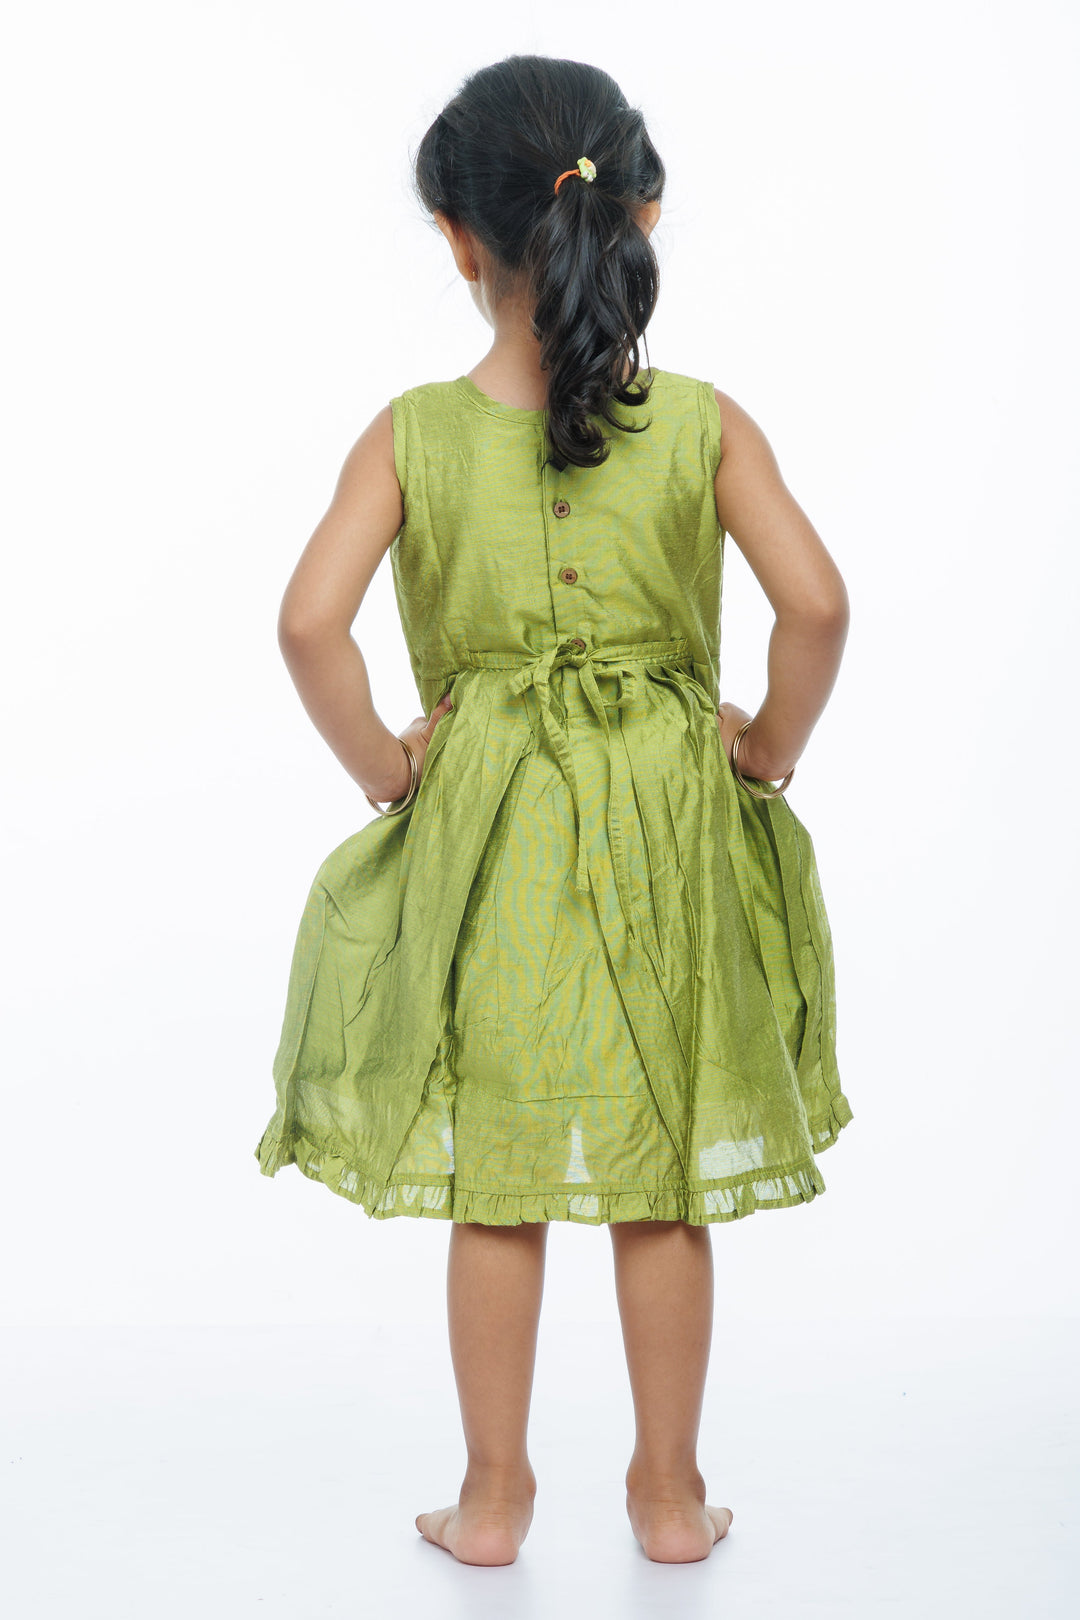 The Nesavu Girls Cotton Frock Girls' Lime Green Pleated Cotton Sundress with Lace Accents Nesavu Casual Lace-Trimmed Green Sundress for Girls | Everyday Summer Chic | The Nesavu